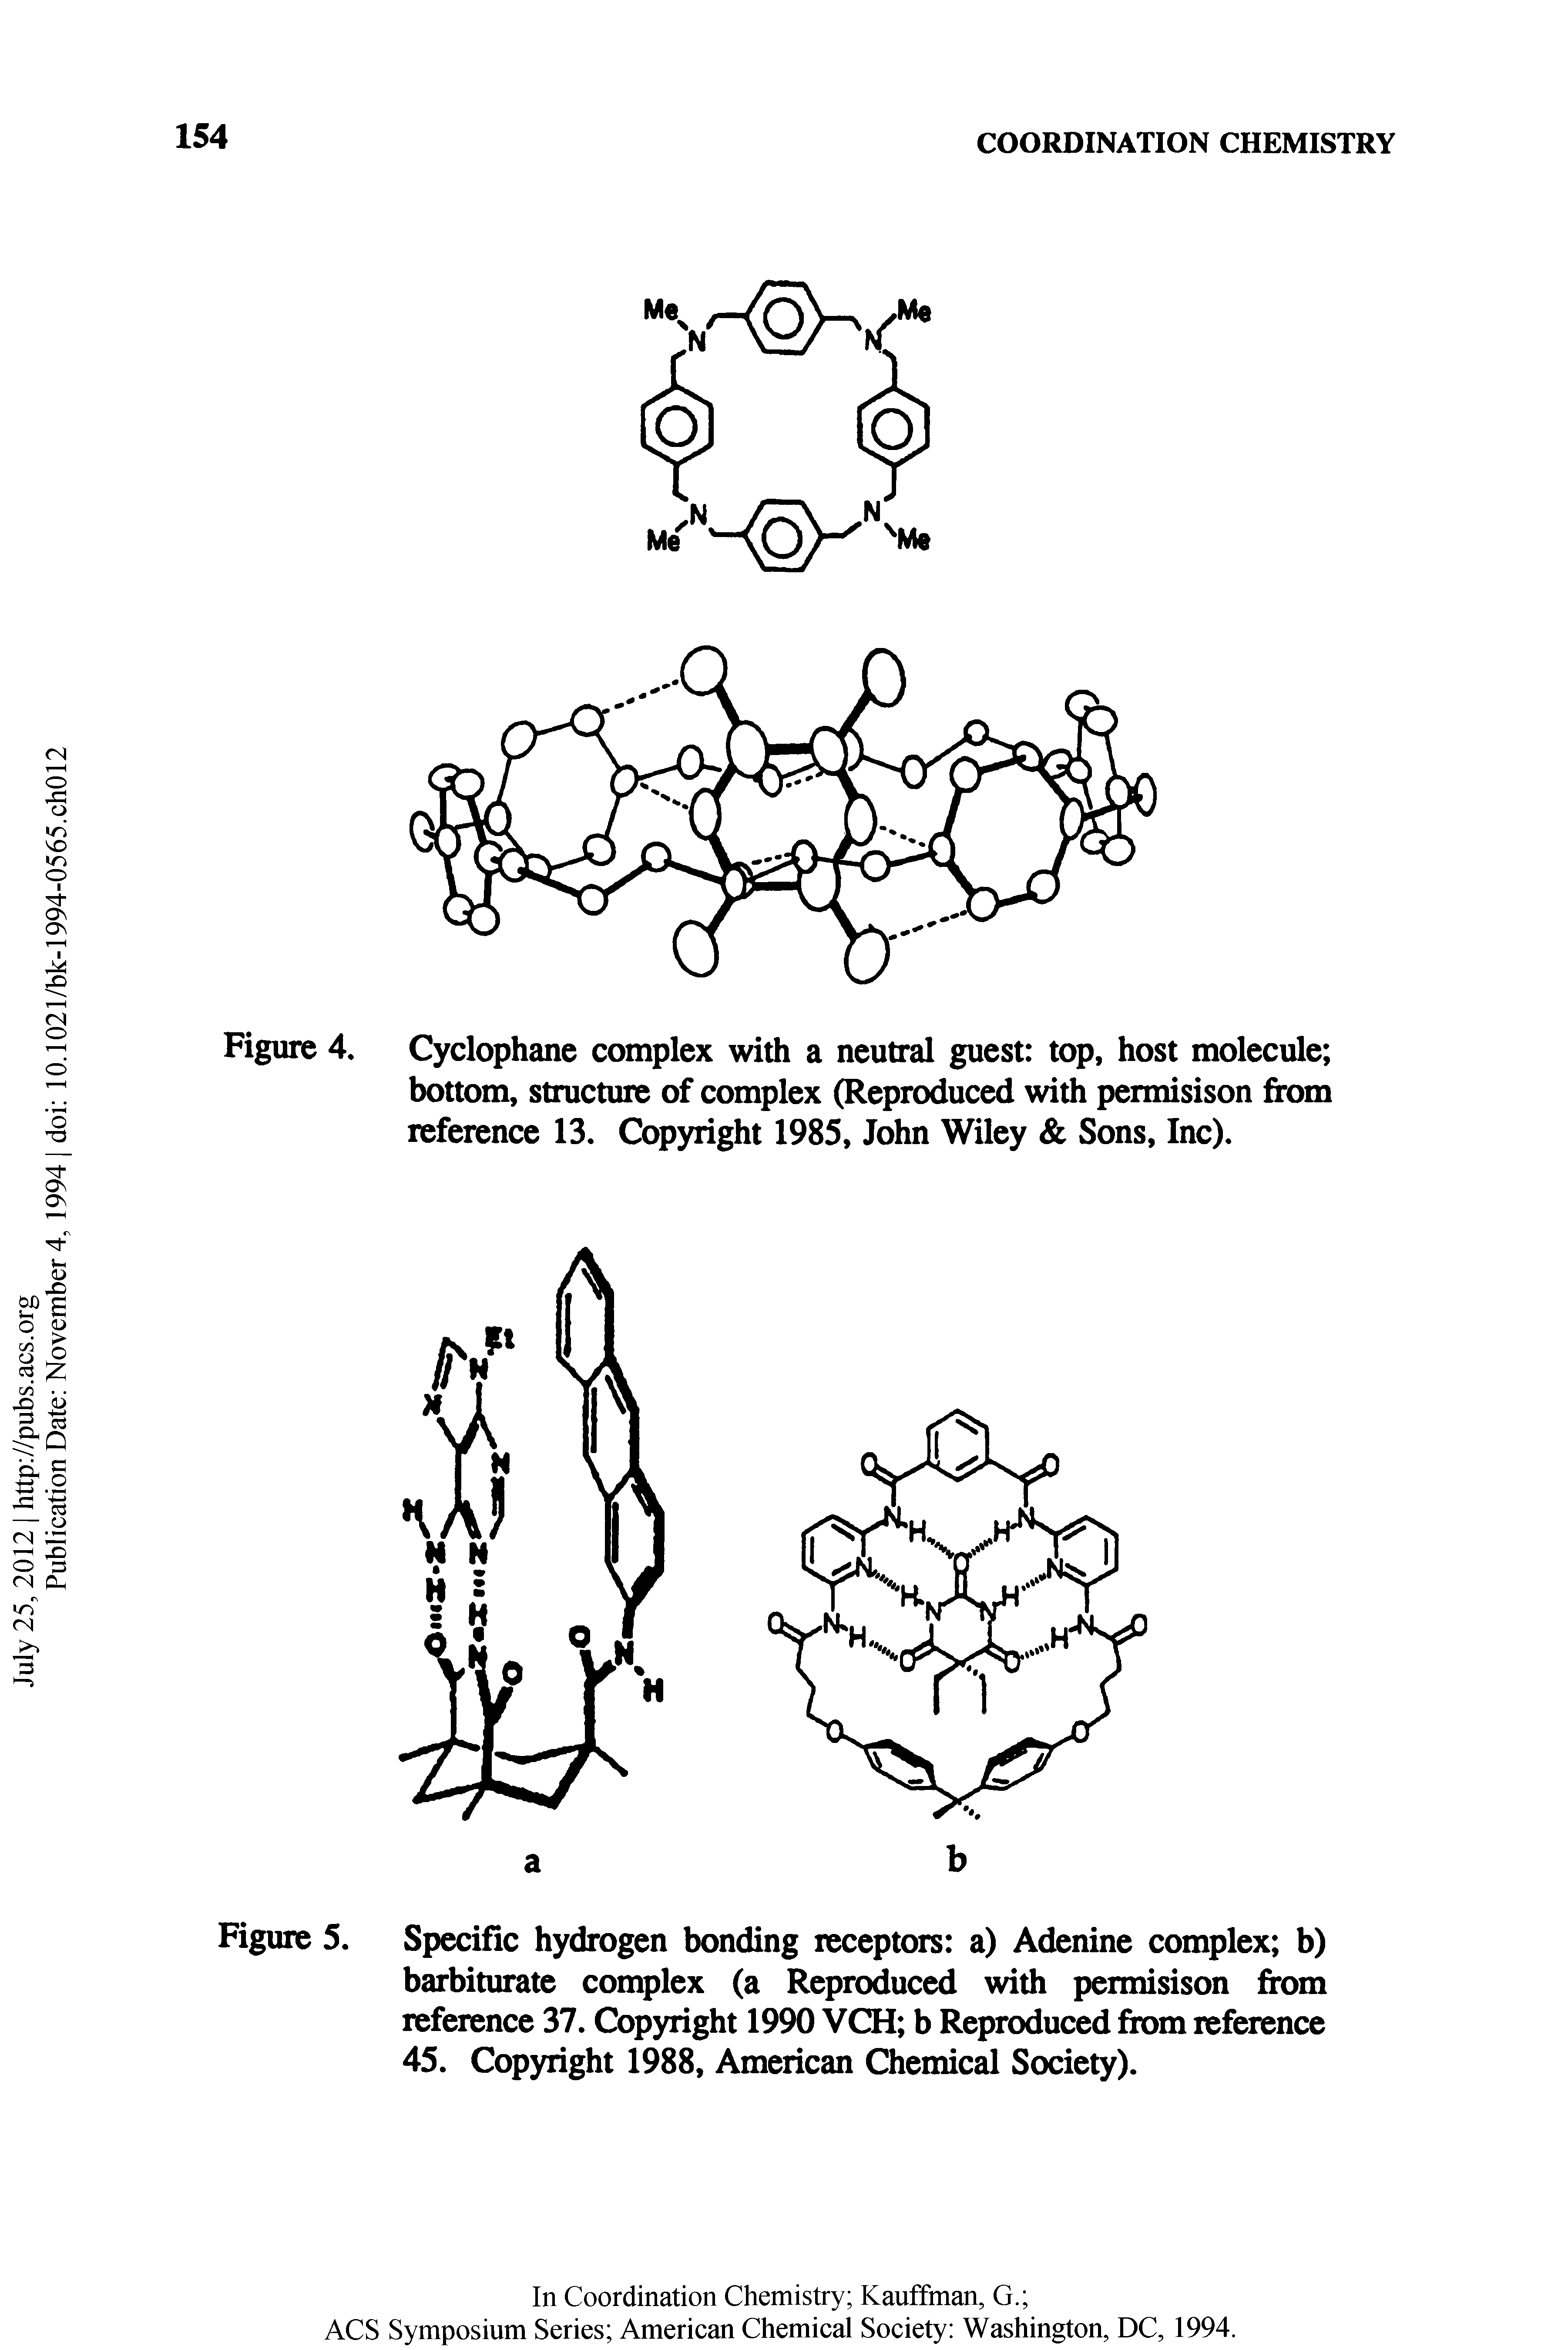 Figure 5. Specific hydrogen bonding receptors a) Adenine complex b) barbiturate complex (a Reproduced with permisison from reference 37. Copyright 1990 VCH b Reproduced from reference 45. Copyright 1988, American Chemicd Society).